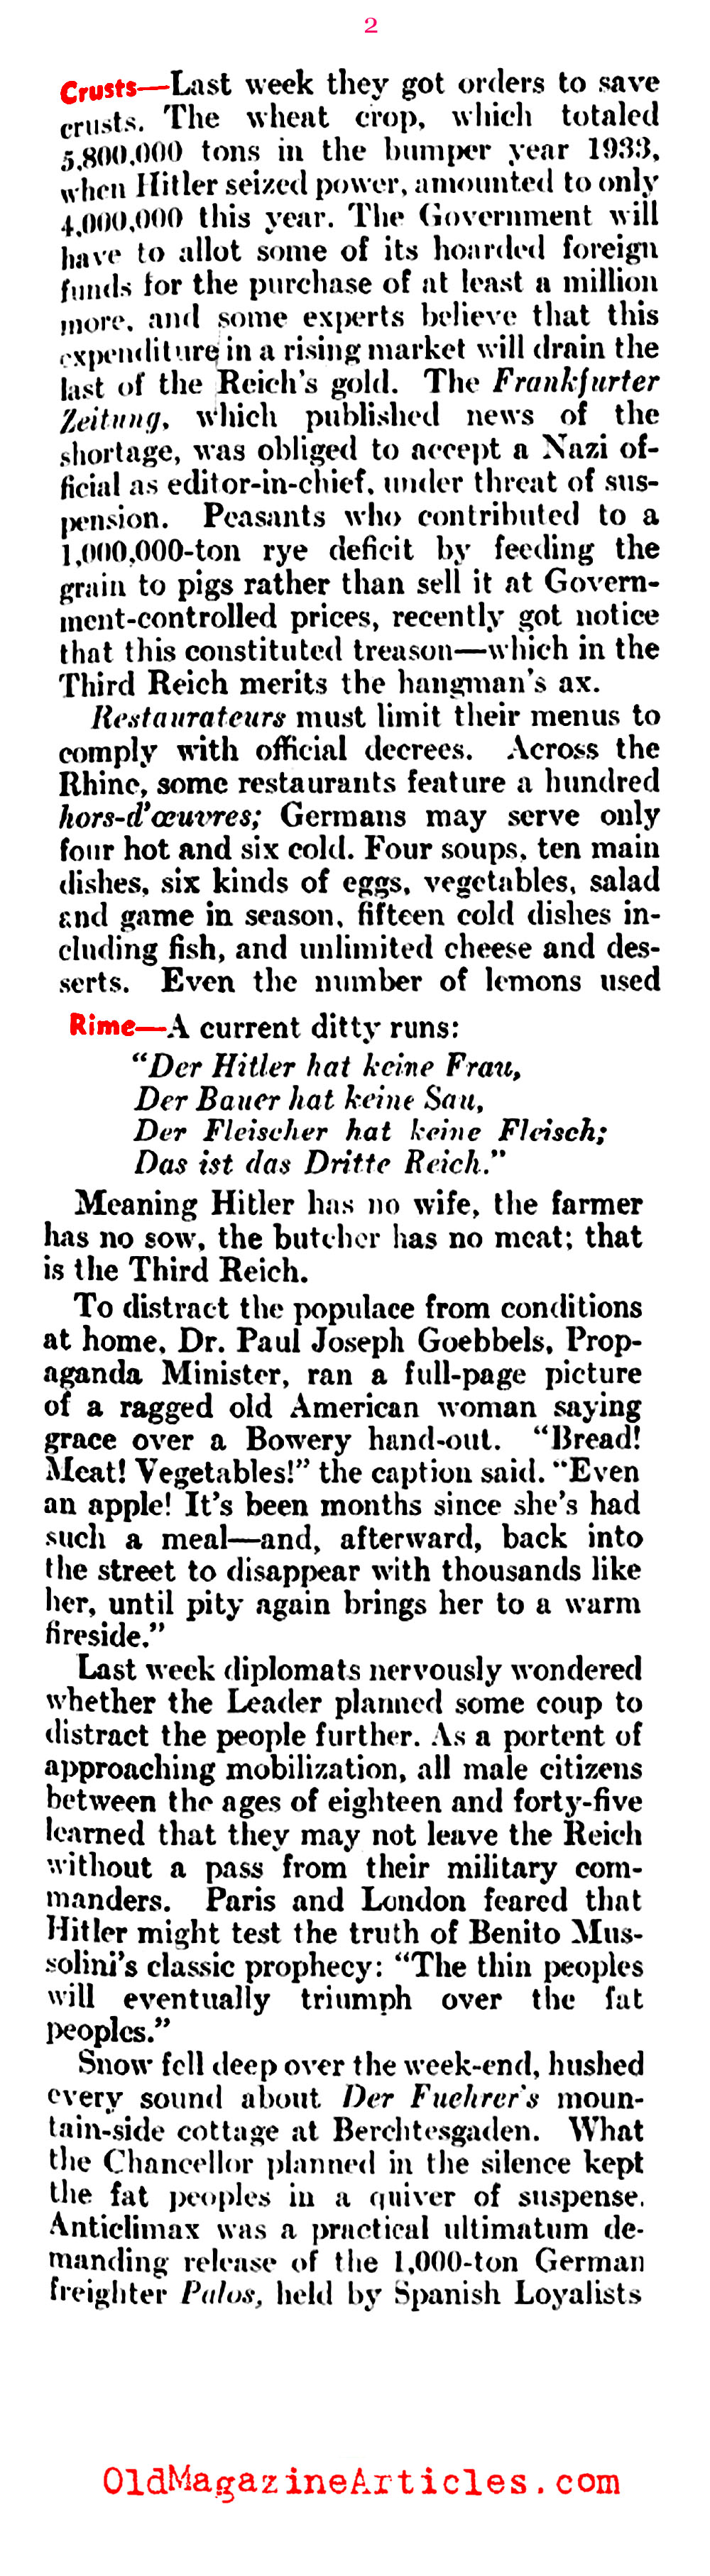  Food Shortages in the Third Reich (Literary Digest, 1937)